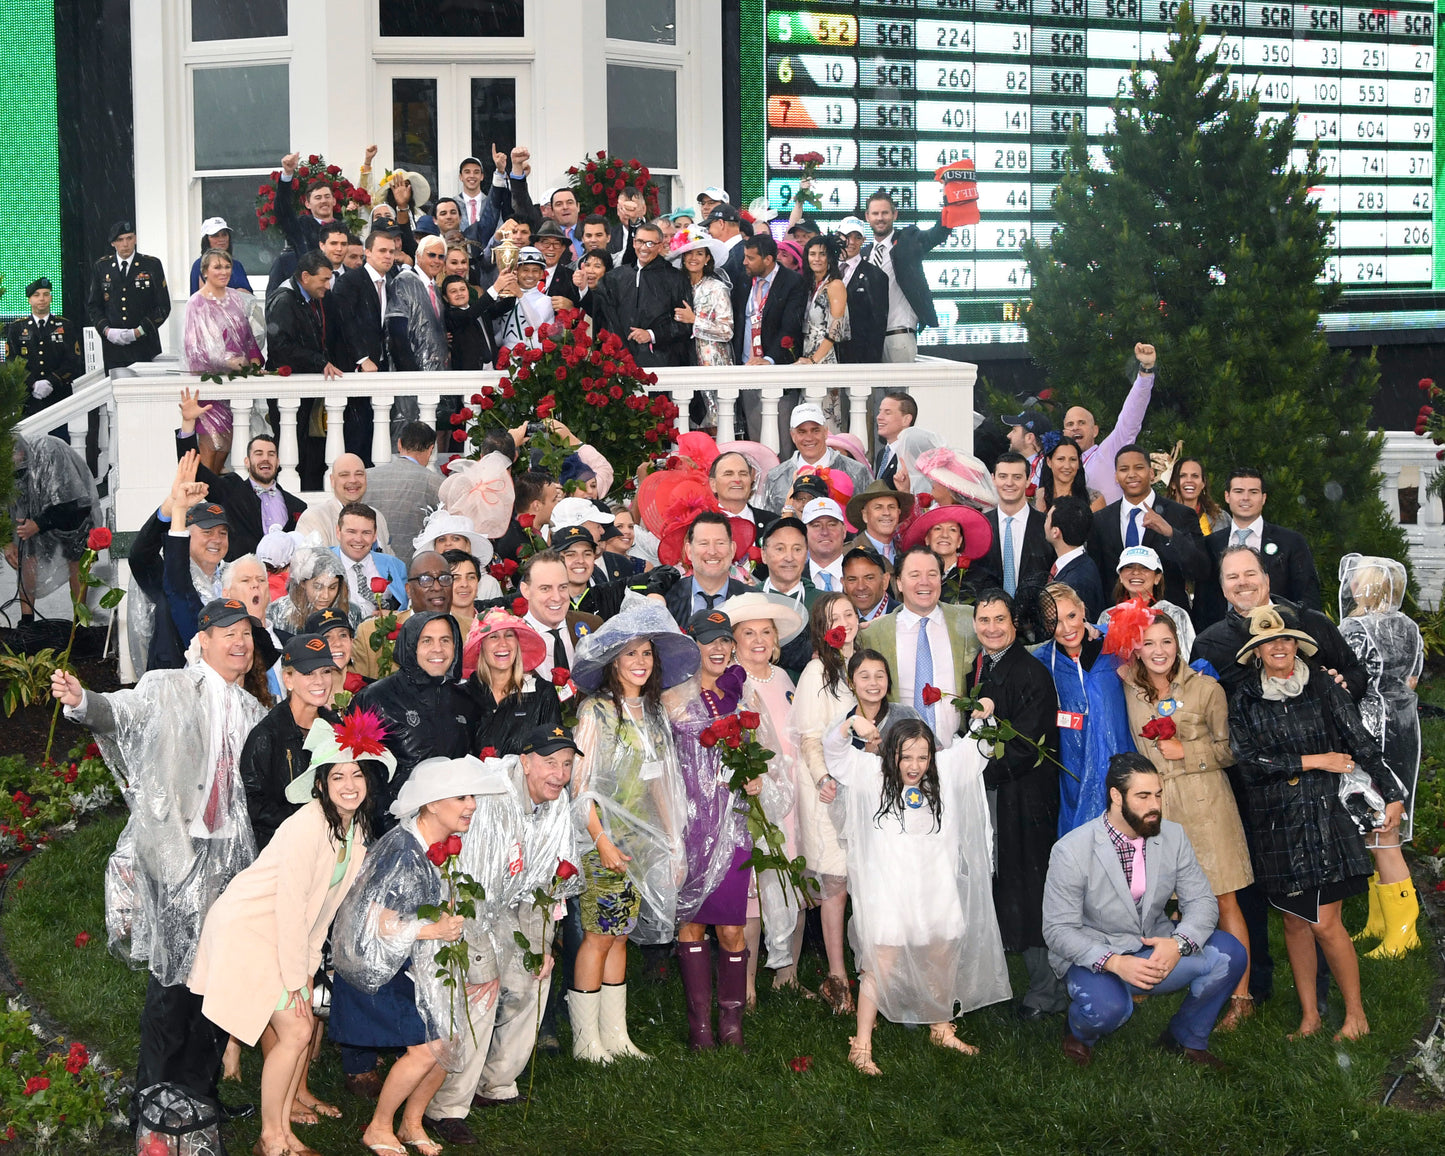 JUSTIFY - 050518 - Race 12 - CD The Kentucky Derby G1 - Trophy Group Photo 06